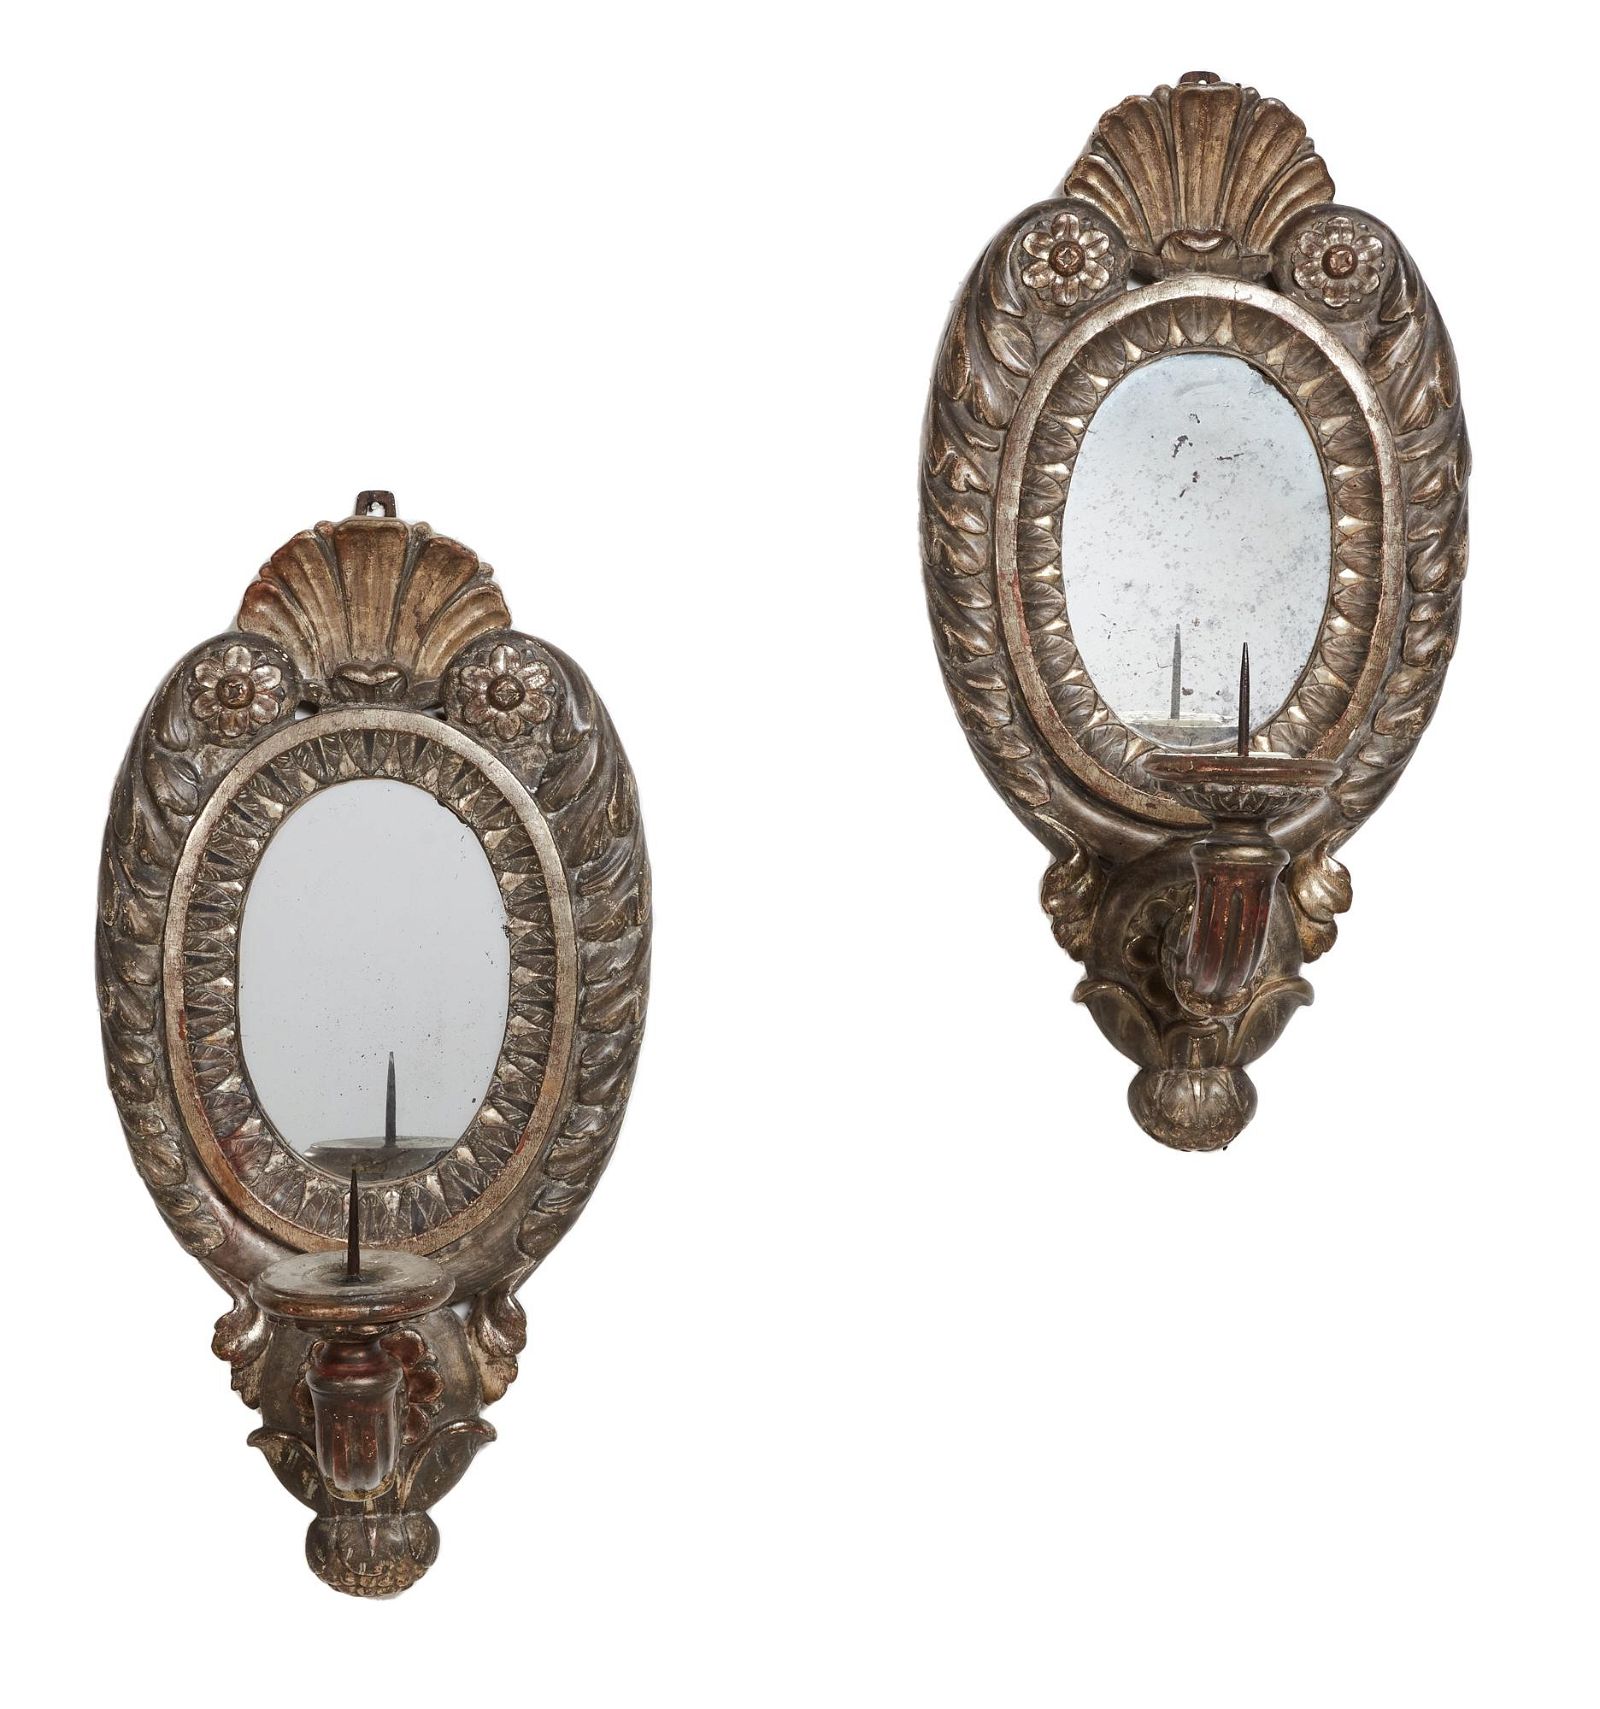 PAIR OF BAROQUE STYLE SILVERED 2fb25d1